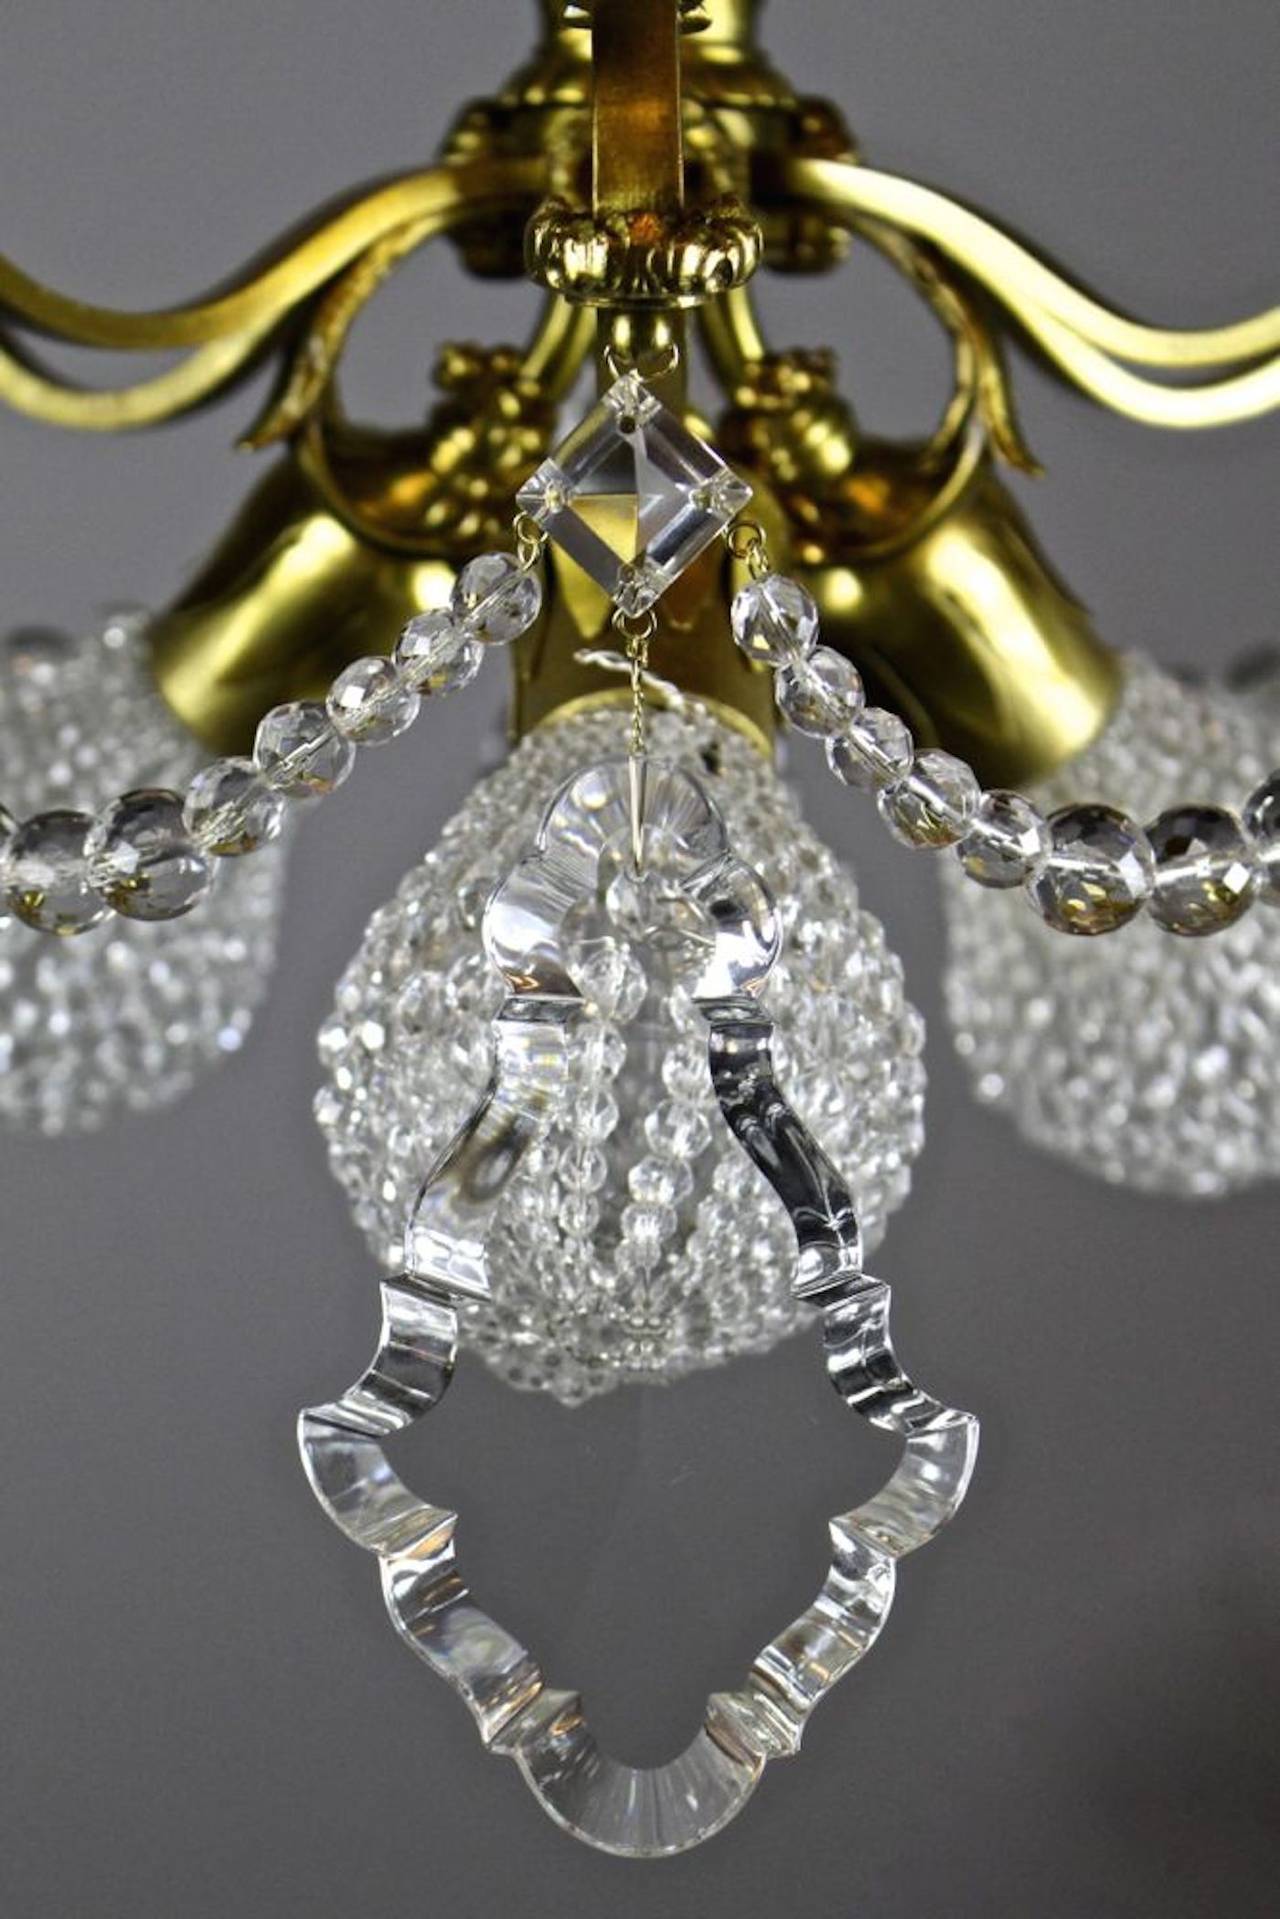 Three-Light Cut-Crystal Rococo Basket Fixture Attributed to E. F. Caldwell For Sale 4